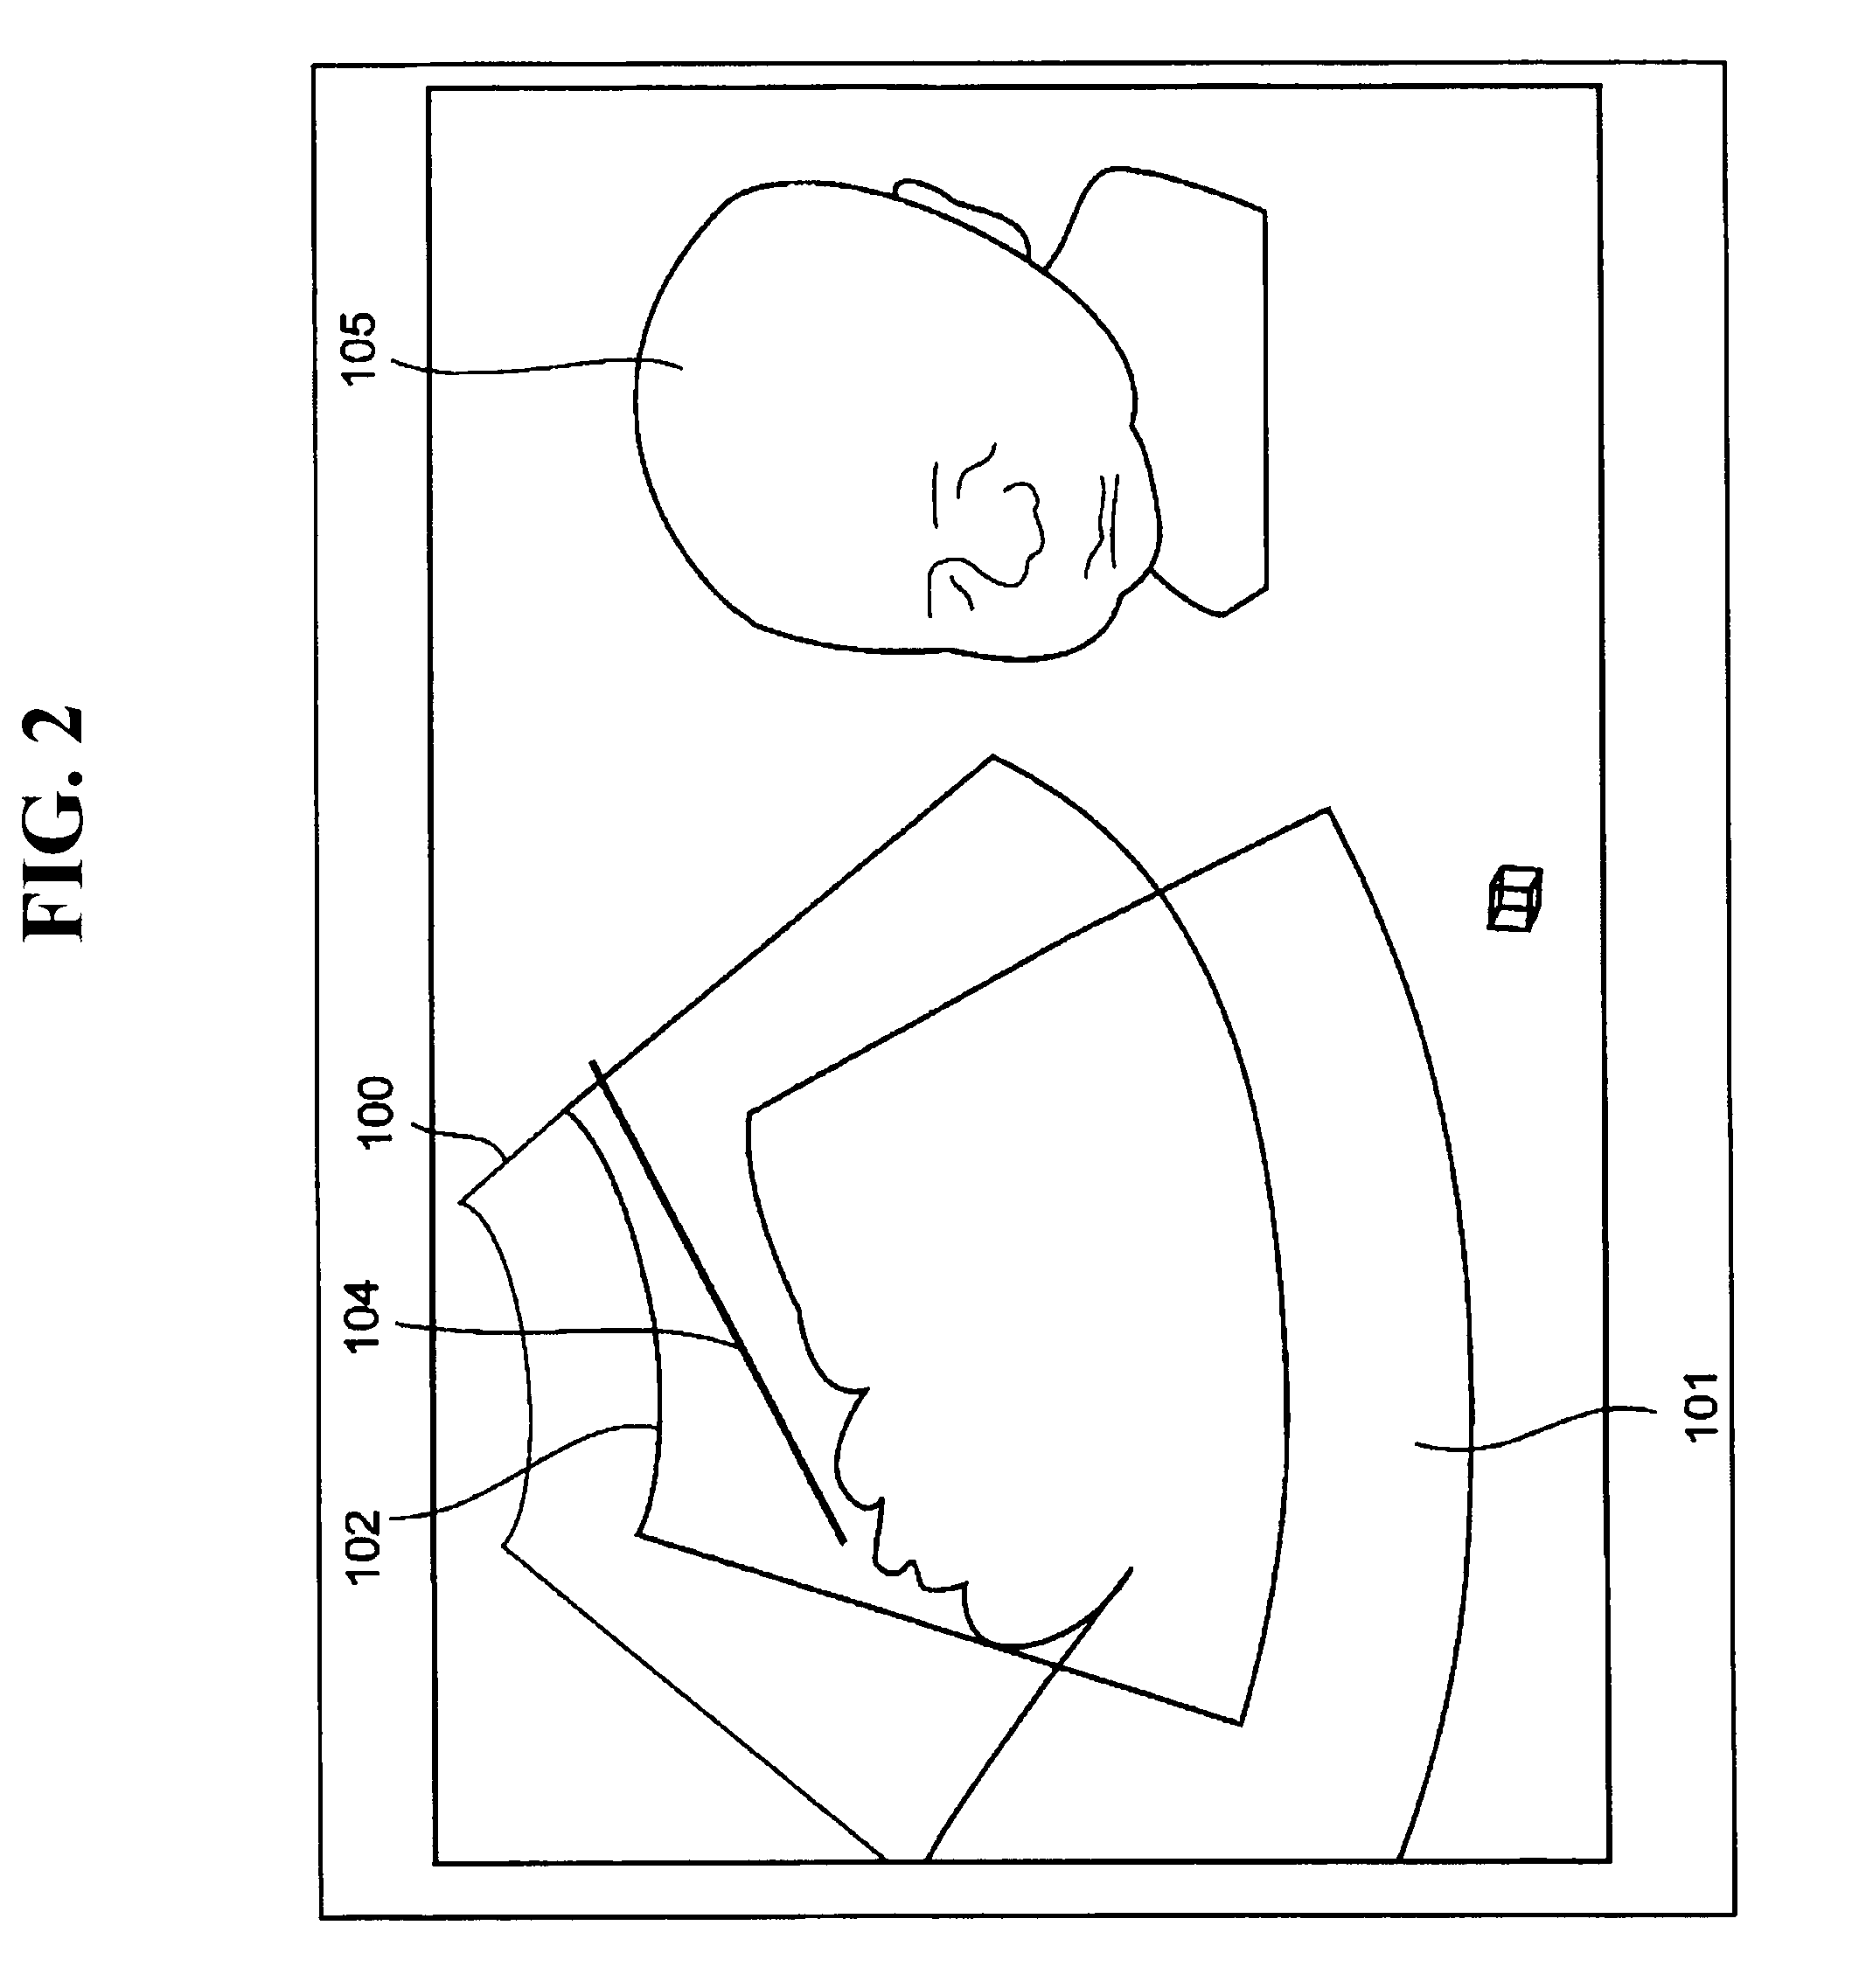 Ultrasound imaging apparatus and method for acquiring ultrasound image